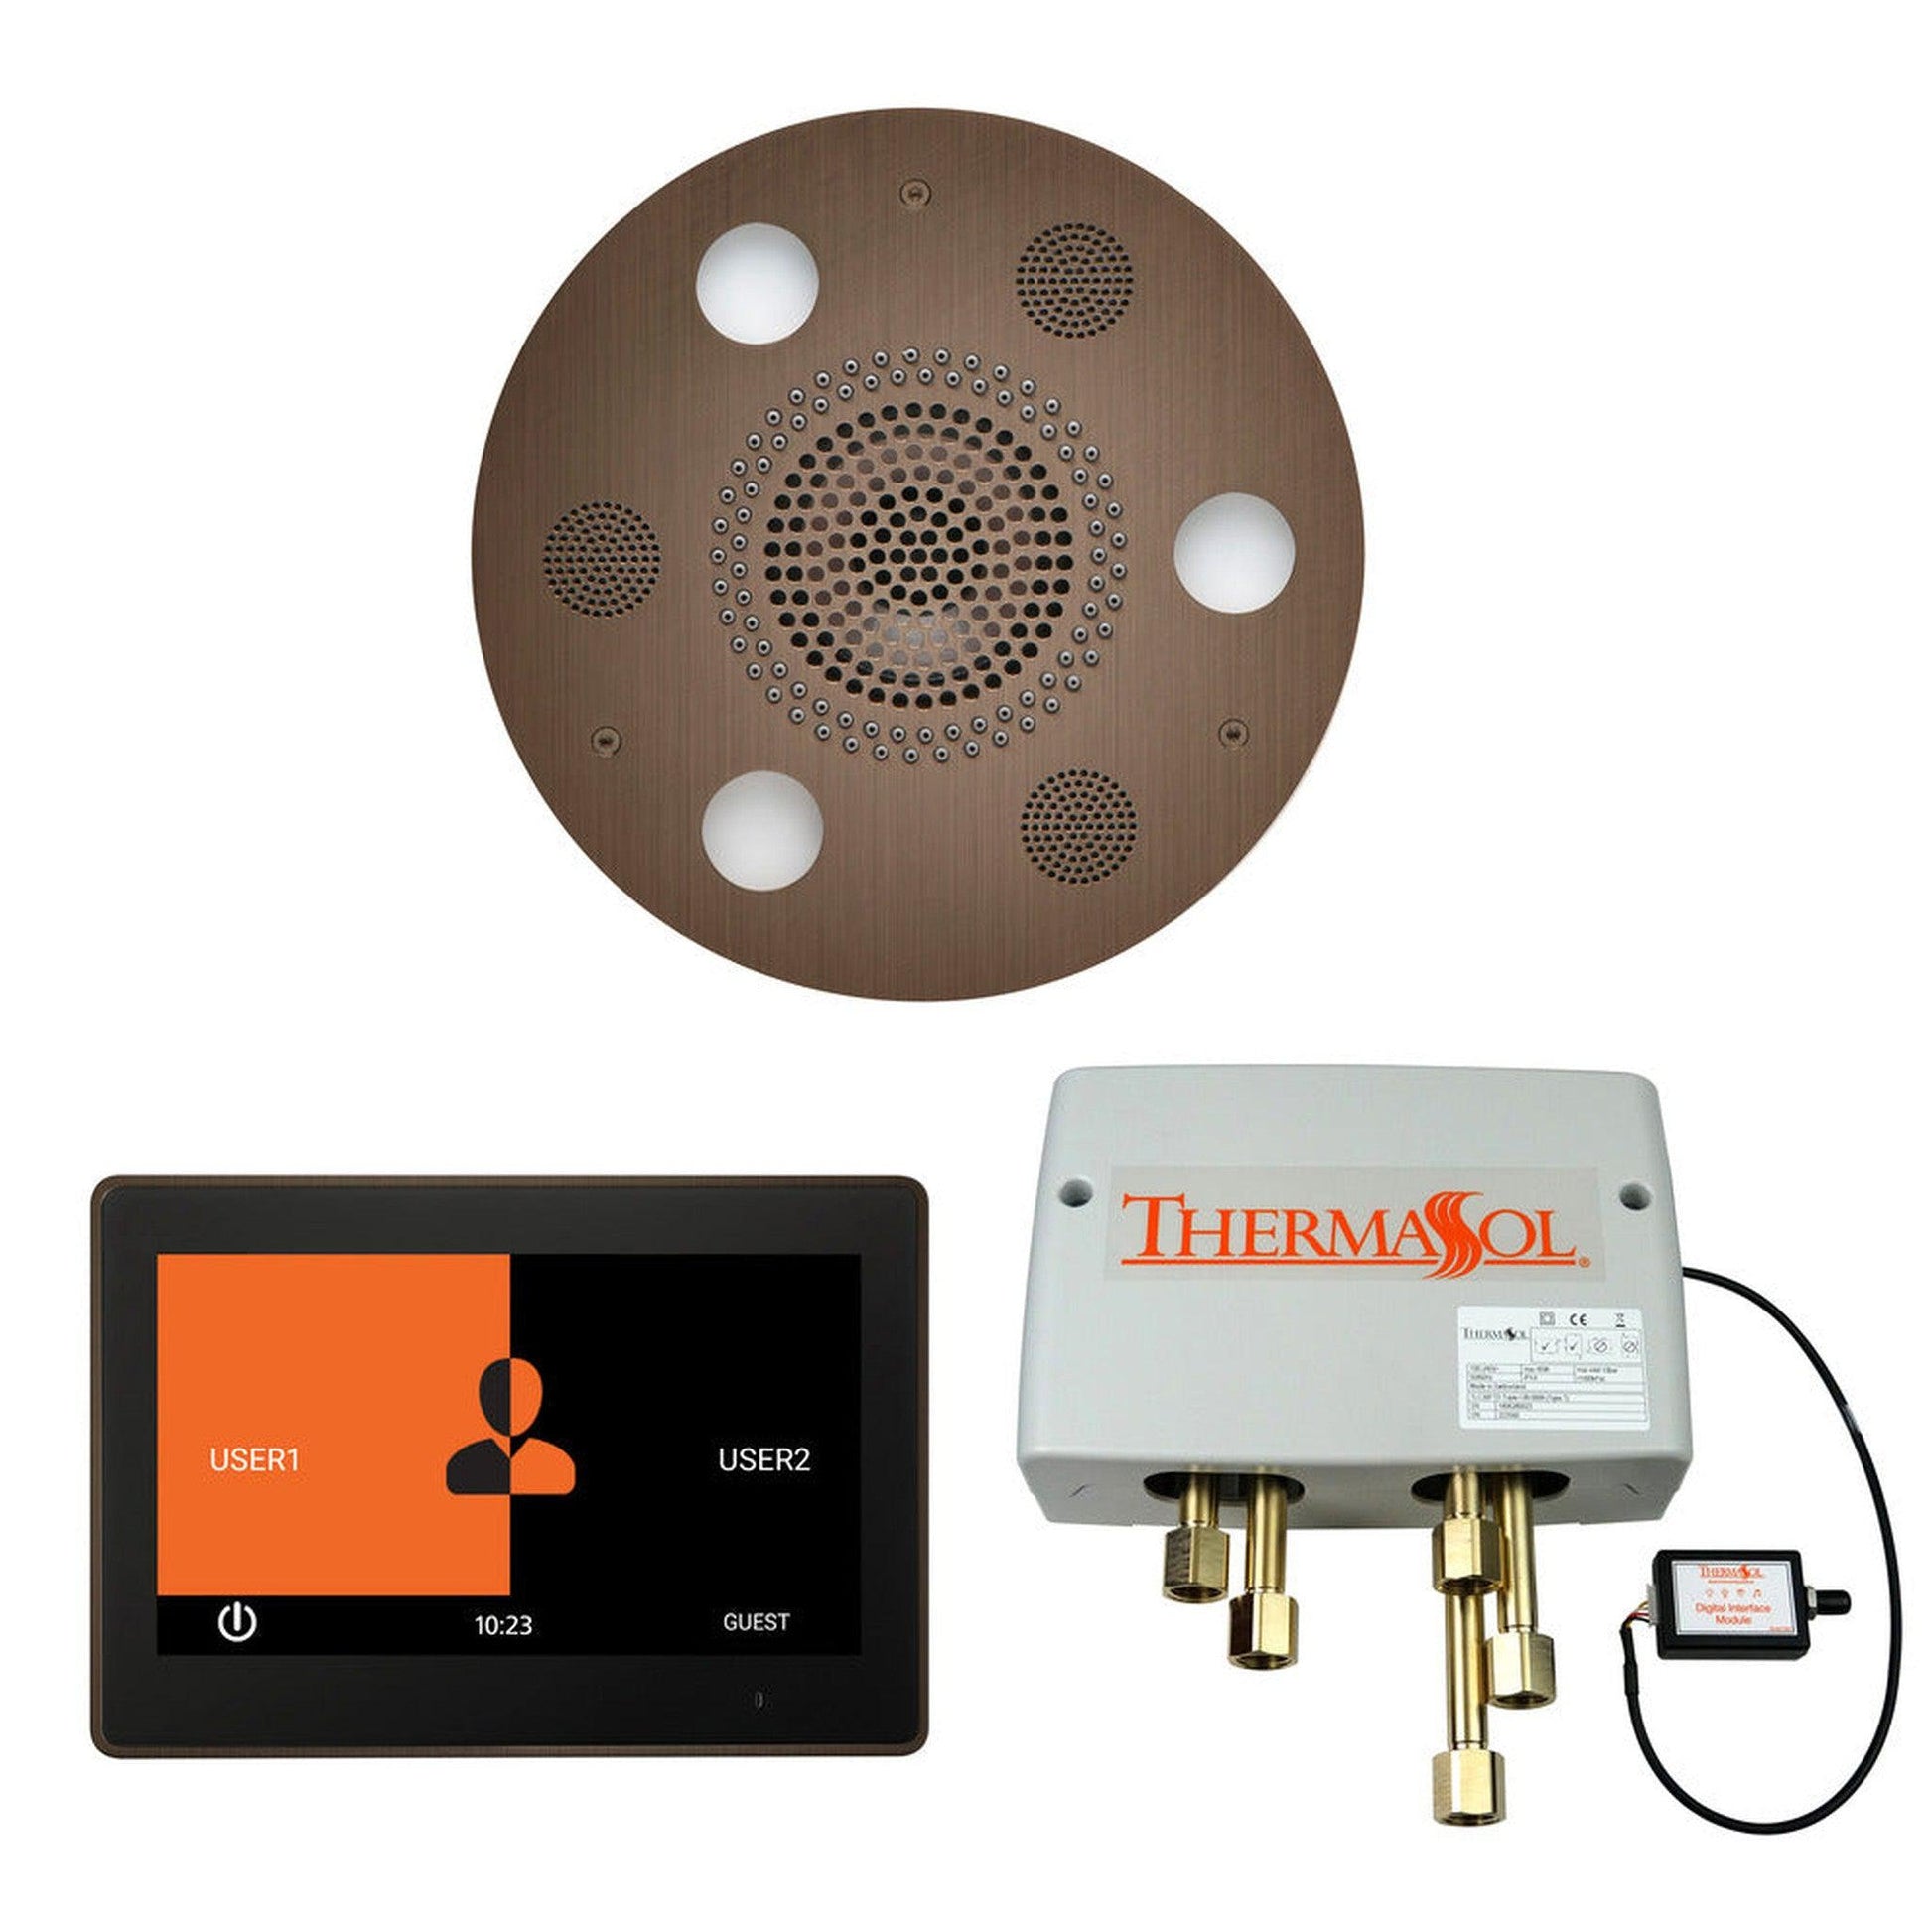 ThermaSol The Wellness Antique Copper Finish Serenity Advancedd Round Shower Package with 10" ThermaTouch